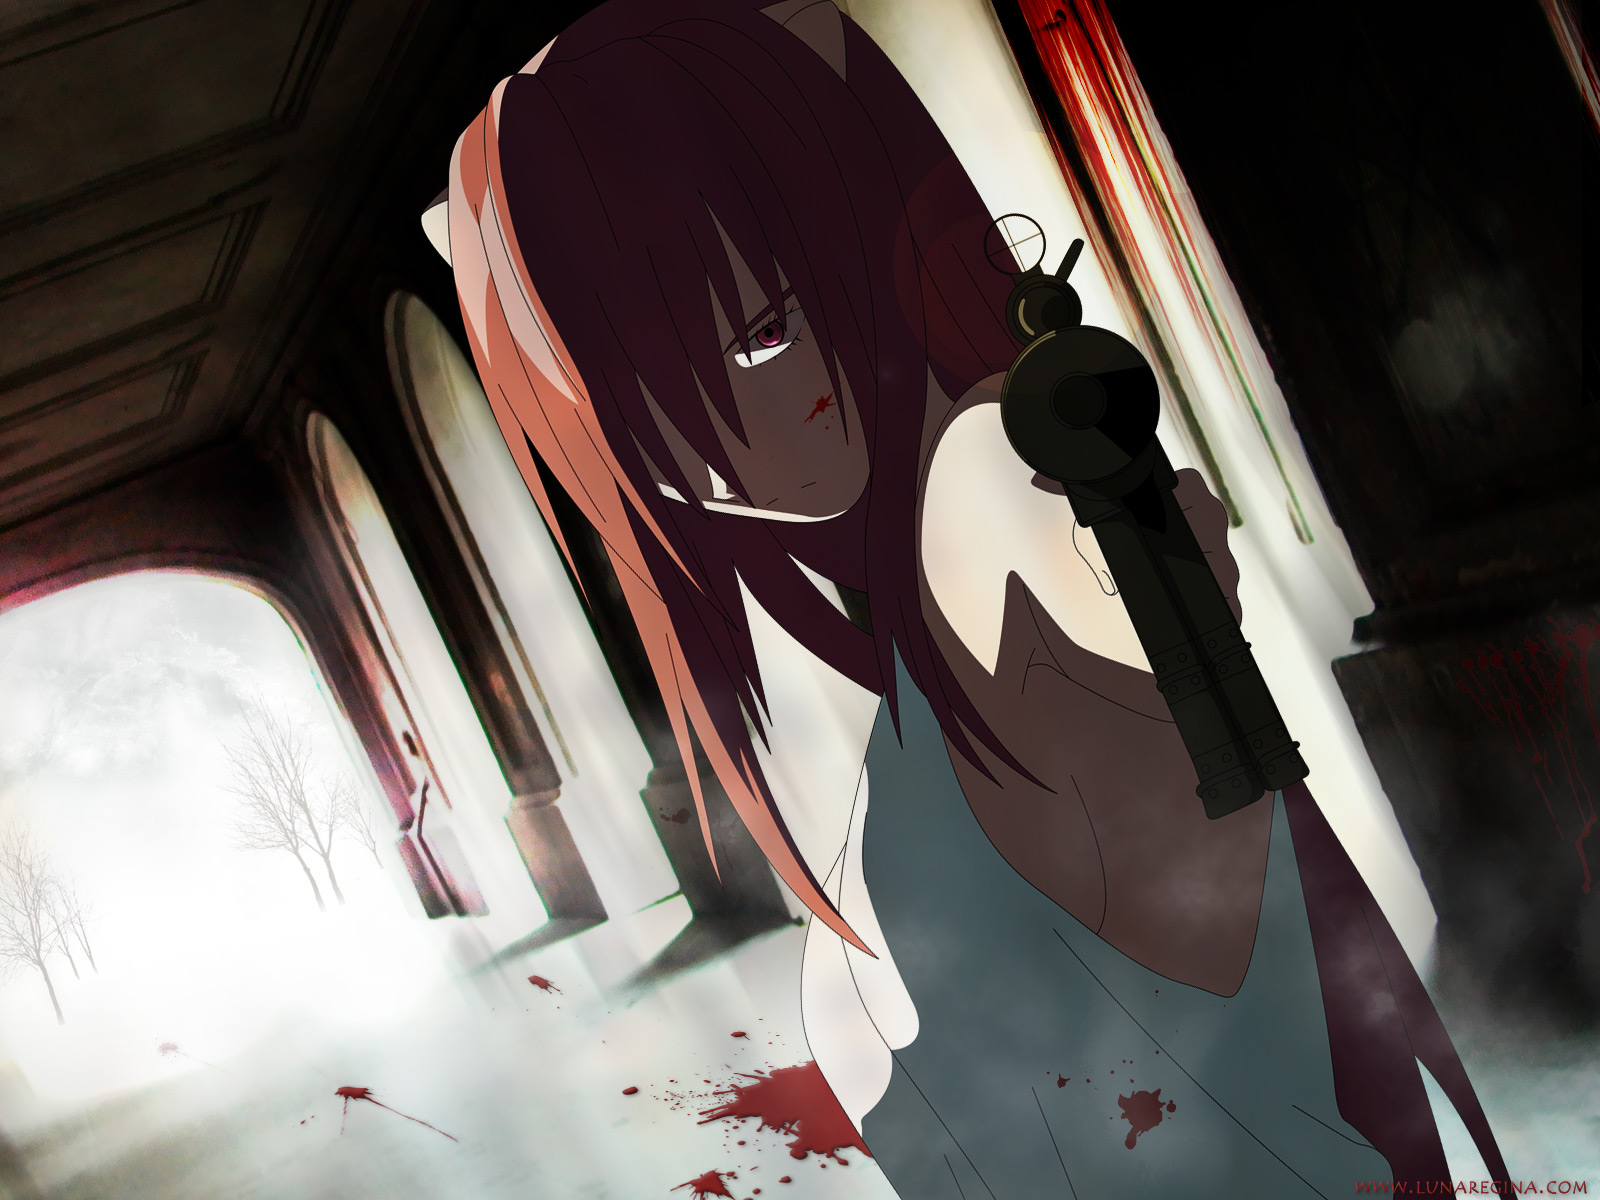 Lucy from Elfen Lied, an anime character with striking red hair, poses confidently amidst a dark background.